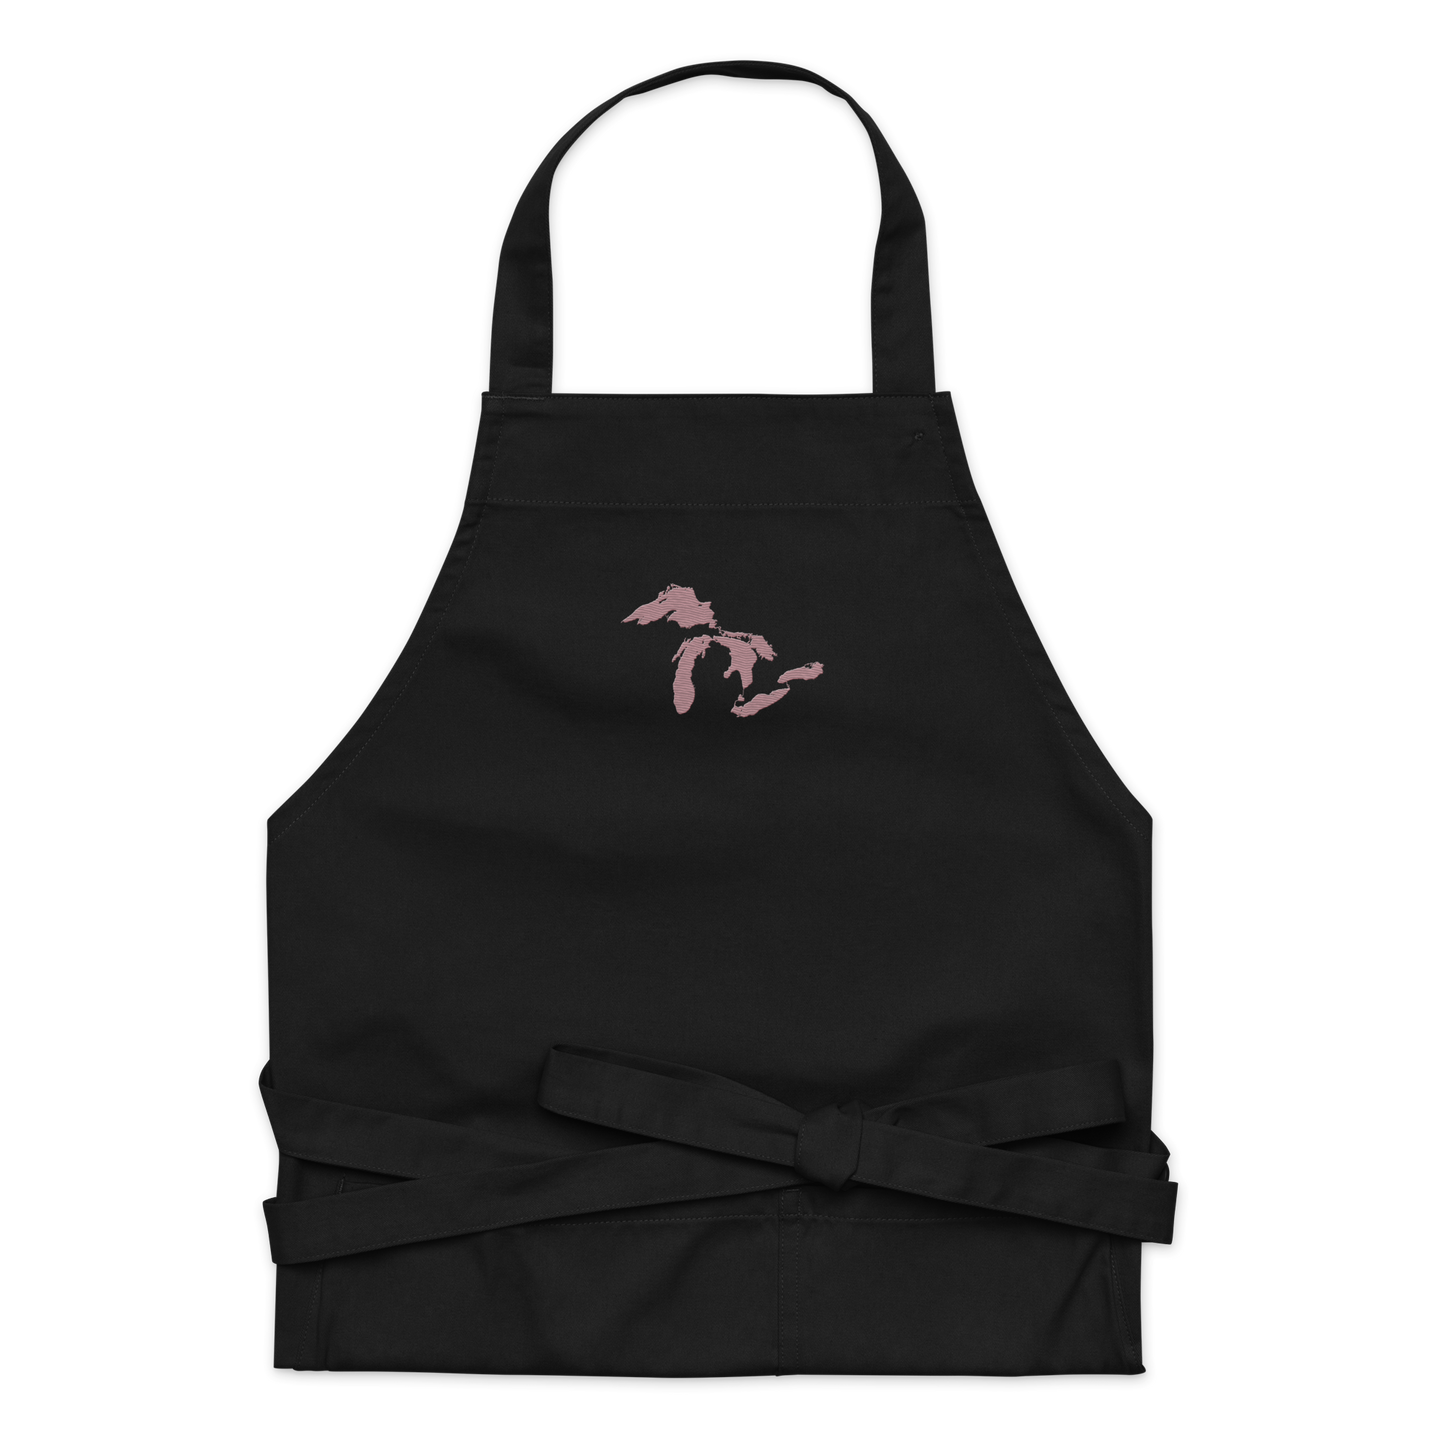 Great Lakes Apron | Unisex Emb. - Cherry Blossom Pink